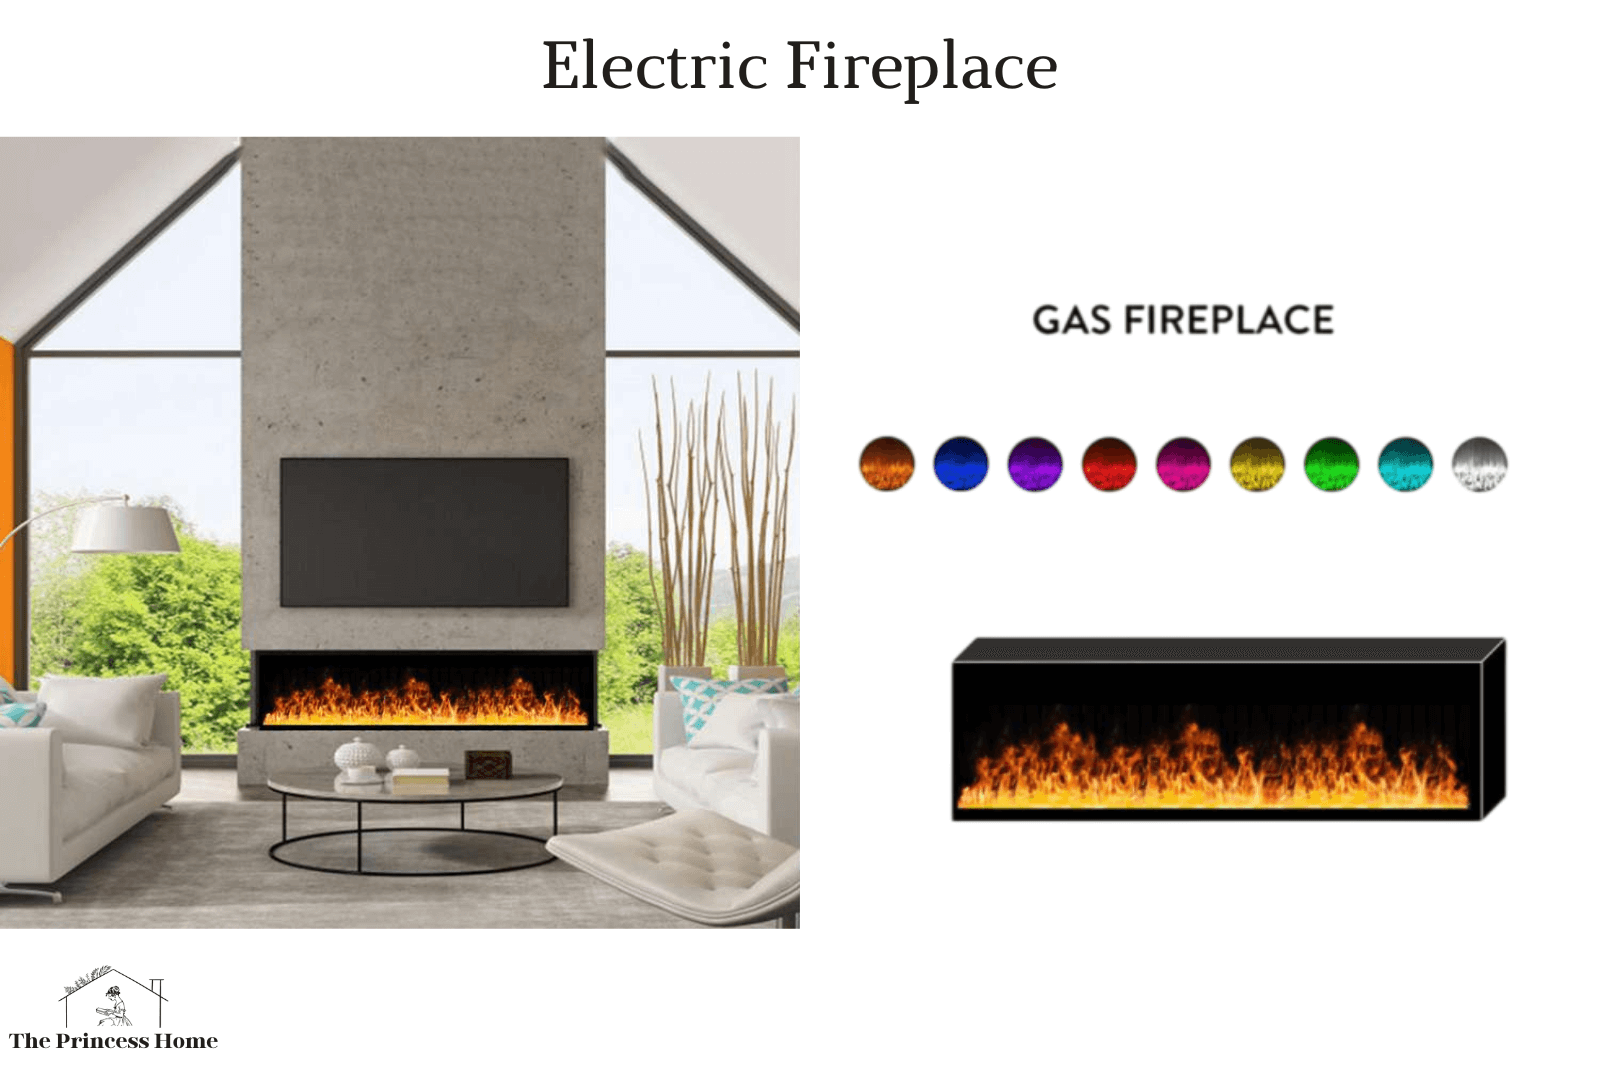 3. Electric Fireplace: